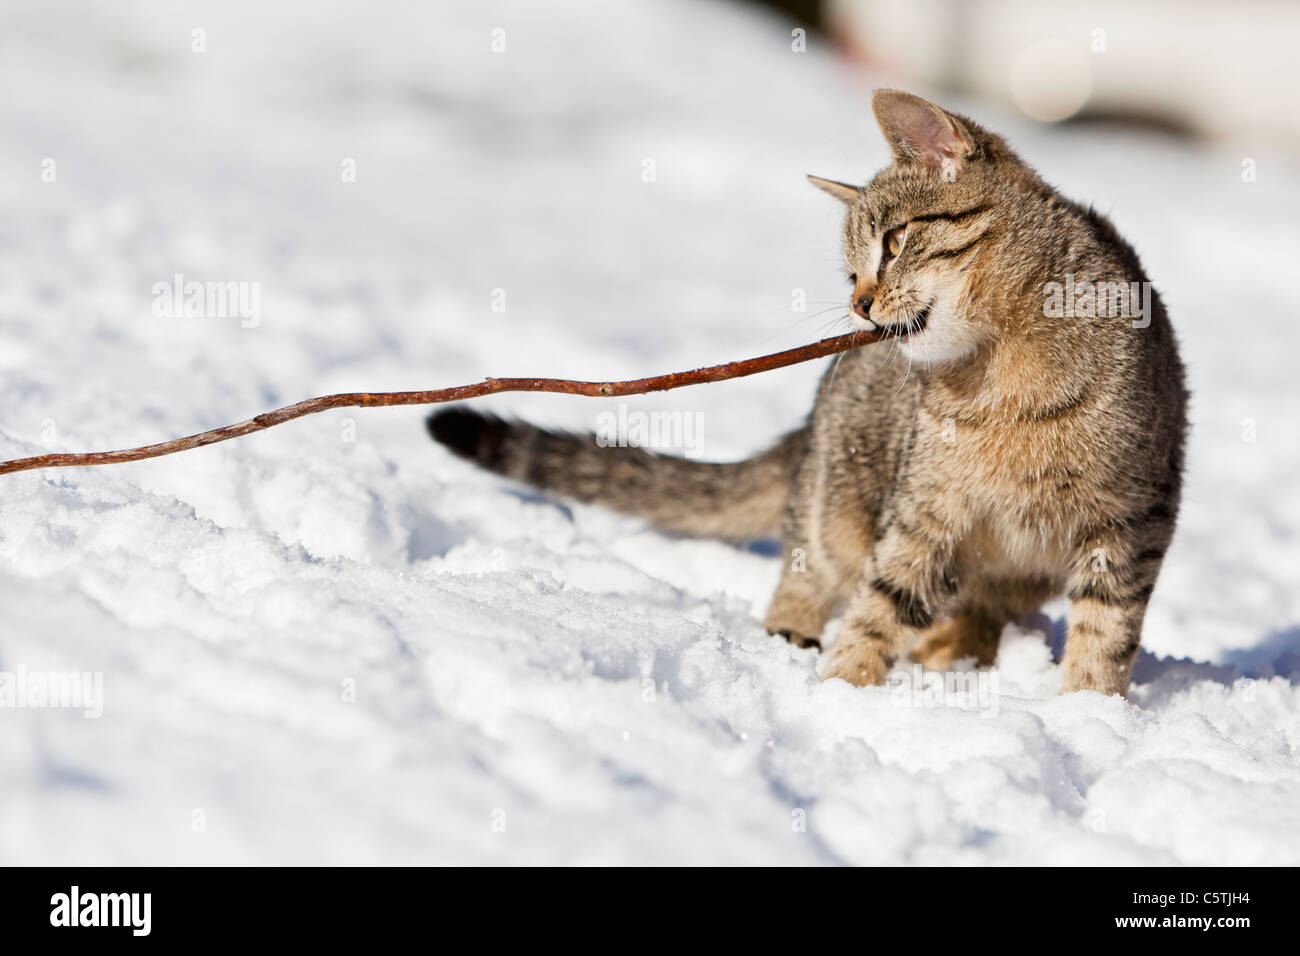 Germany, Bavaria, Close up of tabby kitten playing in snow Stock Photo